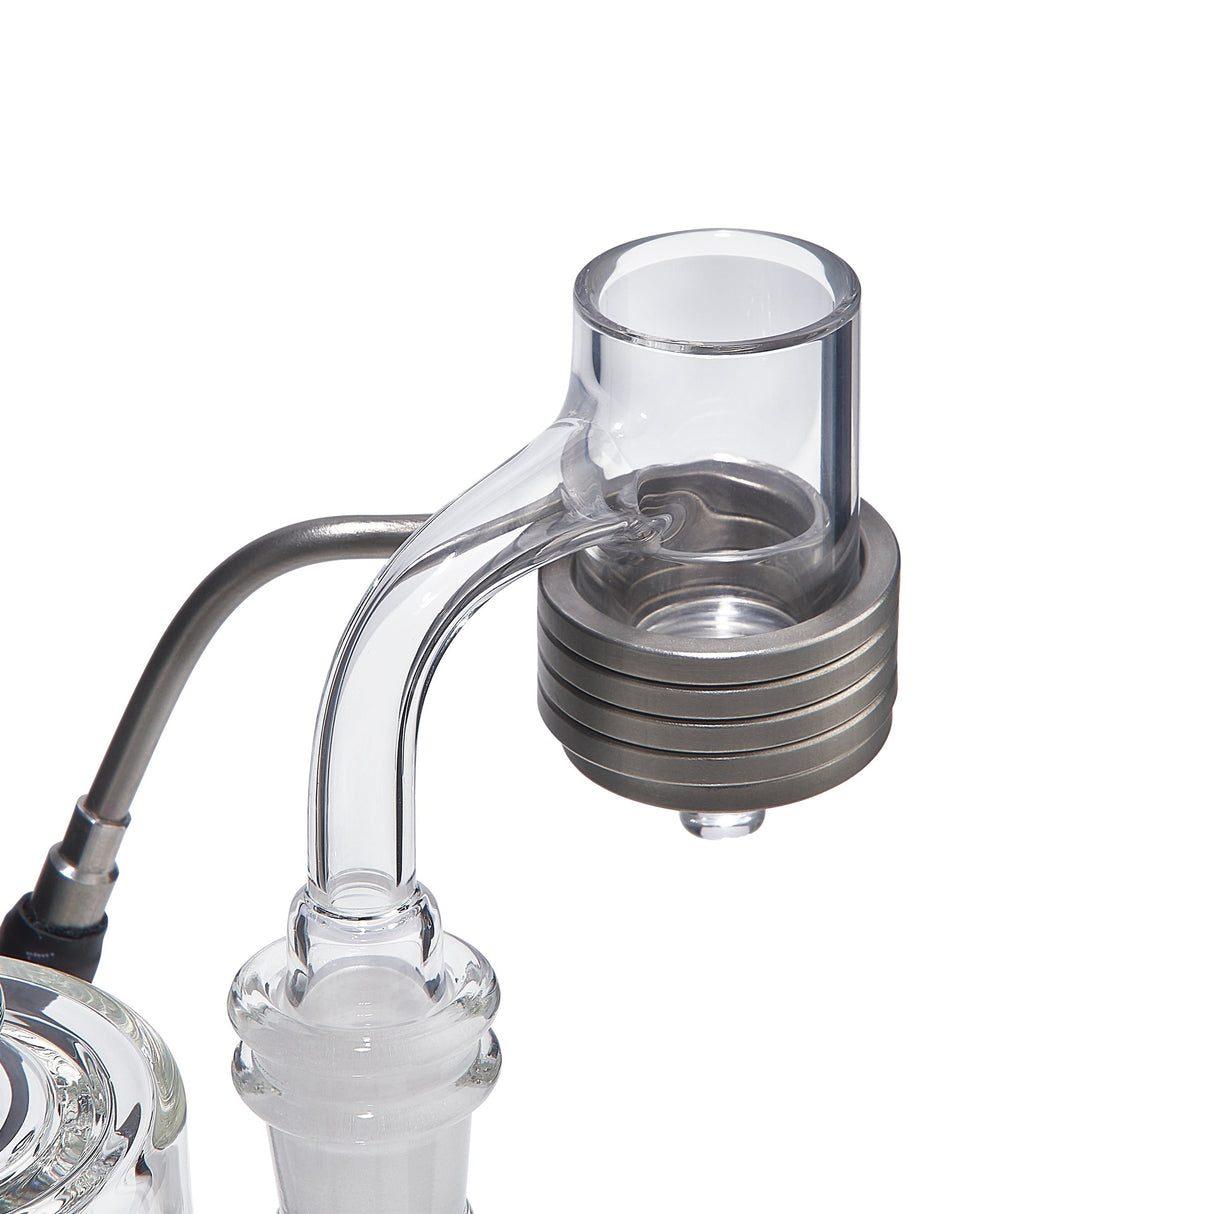 High Five Quartz E-Banger Insert for Dab Rigs, 2 Pack, clear view on glass joint